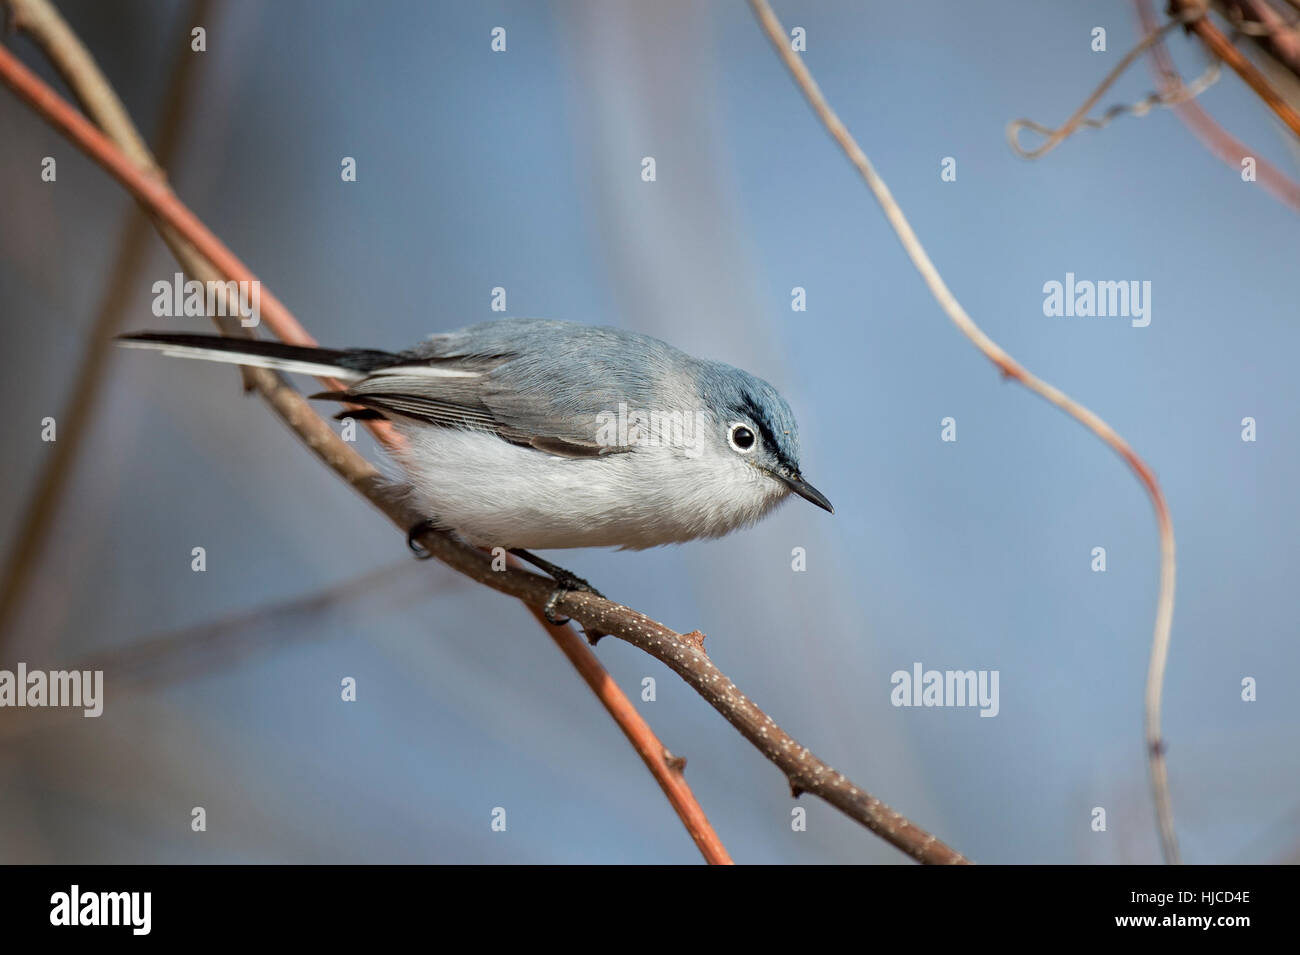 A Blue-gray Gnatcatcher perched on a small branch with a blue sky background. Stock Photo